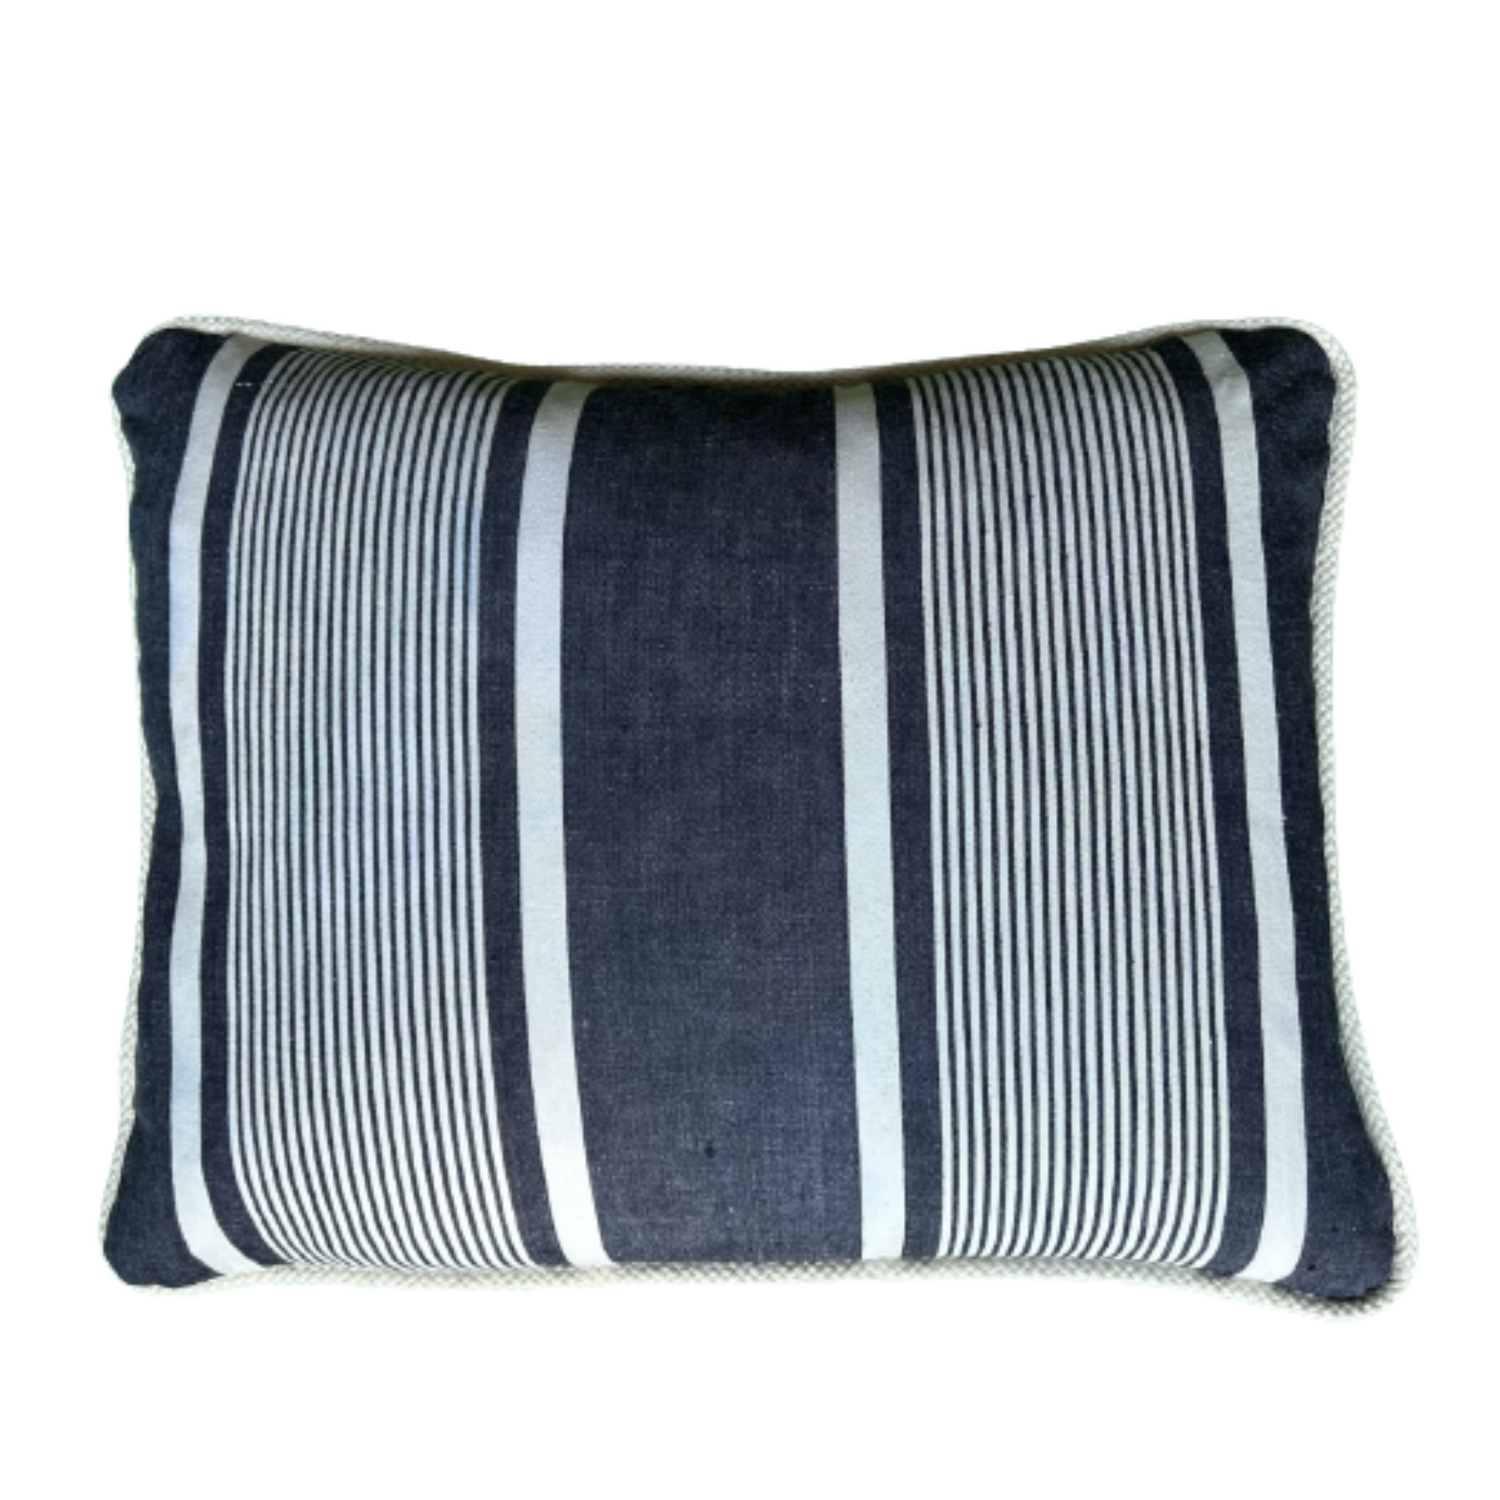 Monarch Chenille 18x18 Denim Blue Throw Pillow with Feather Insert